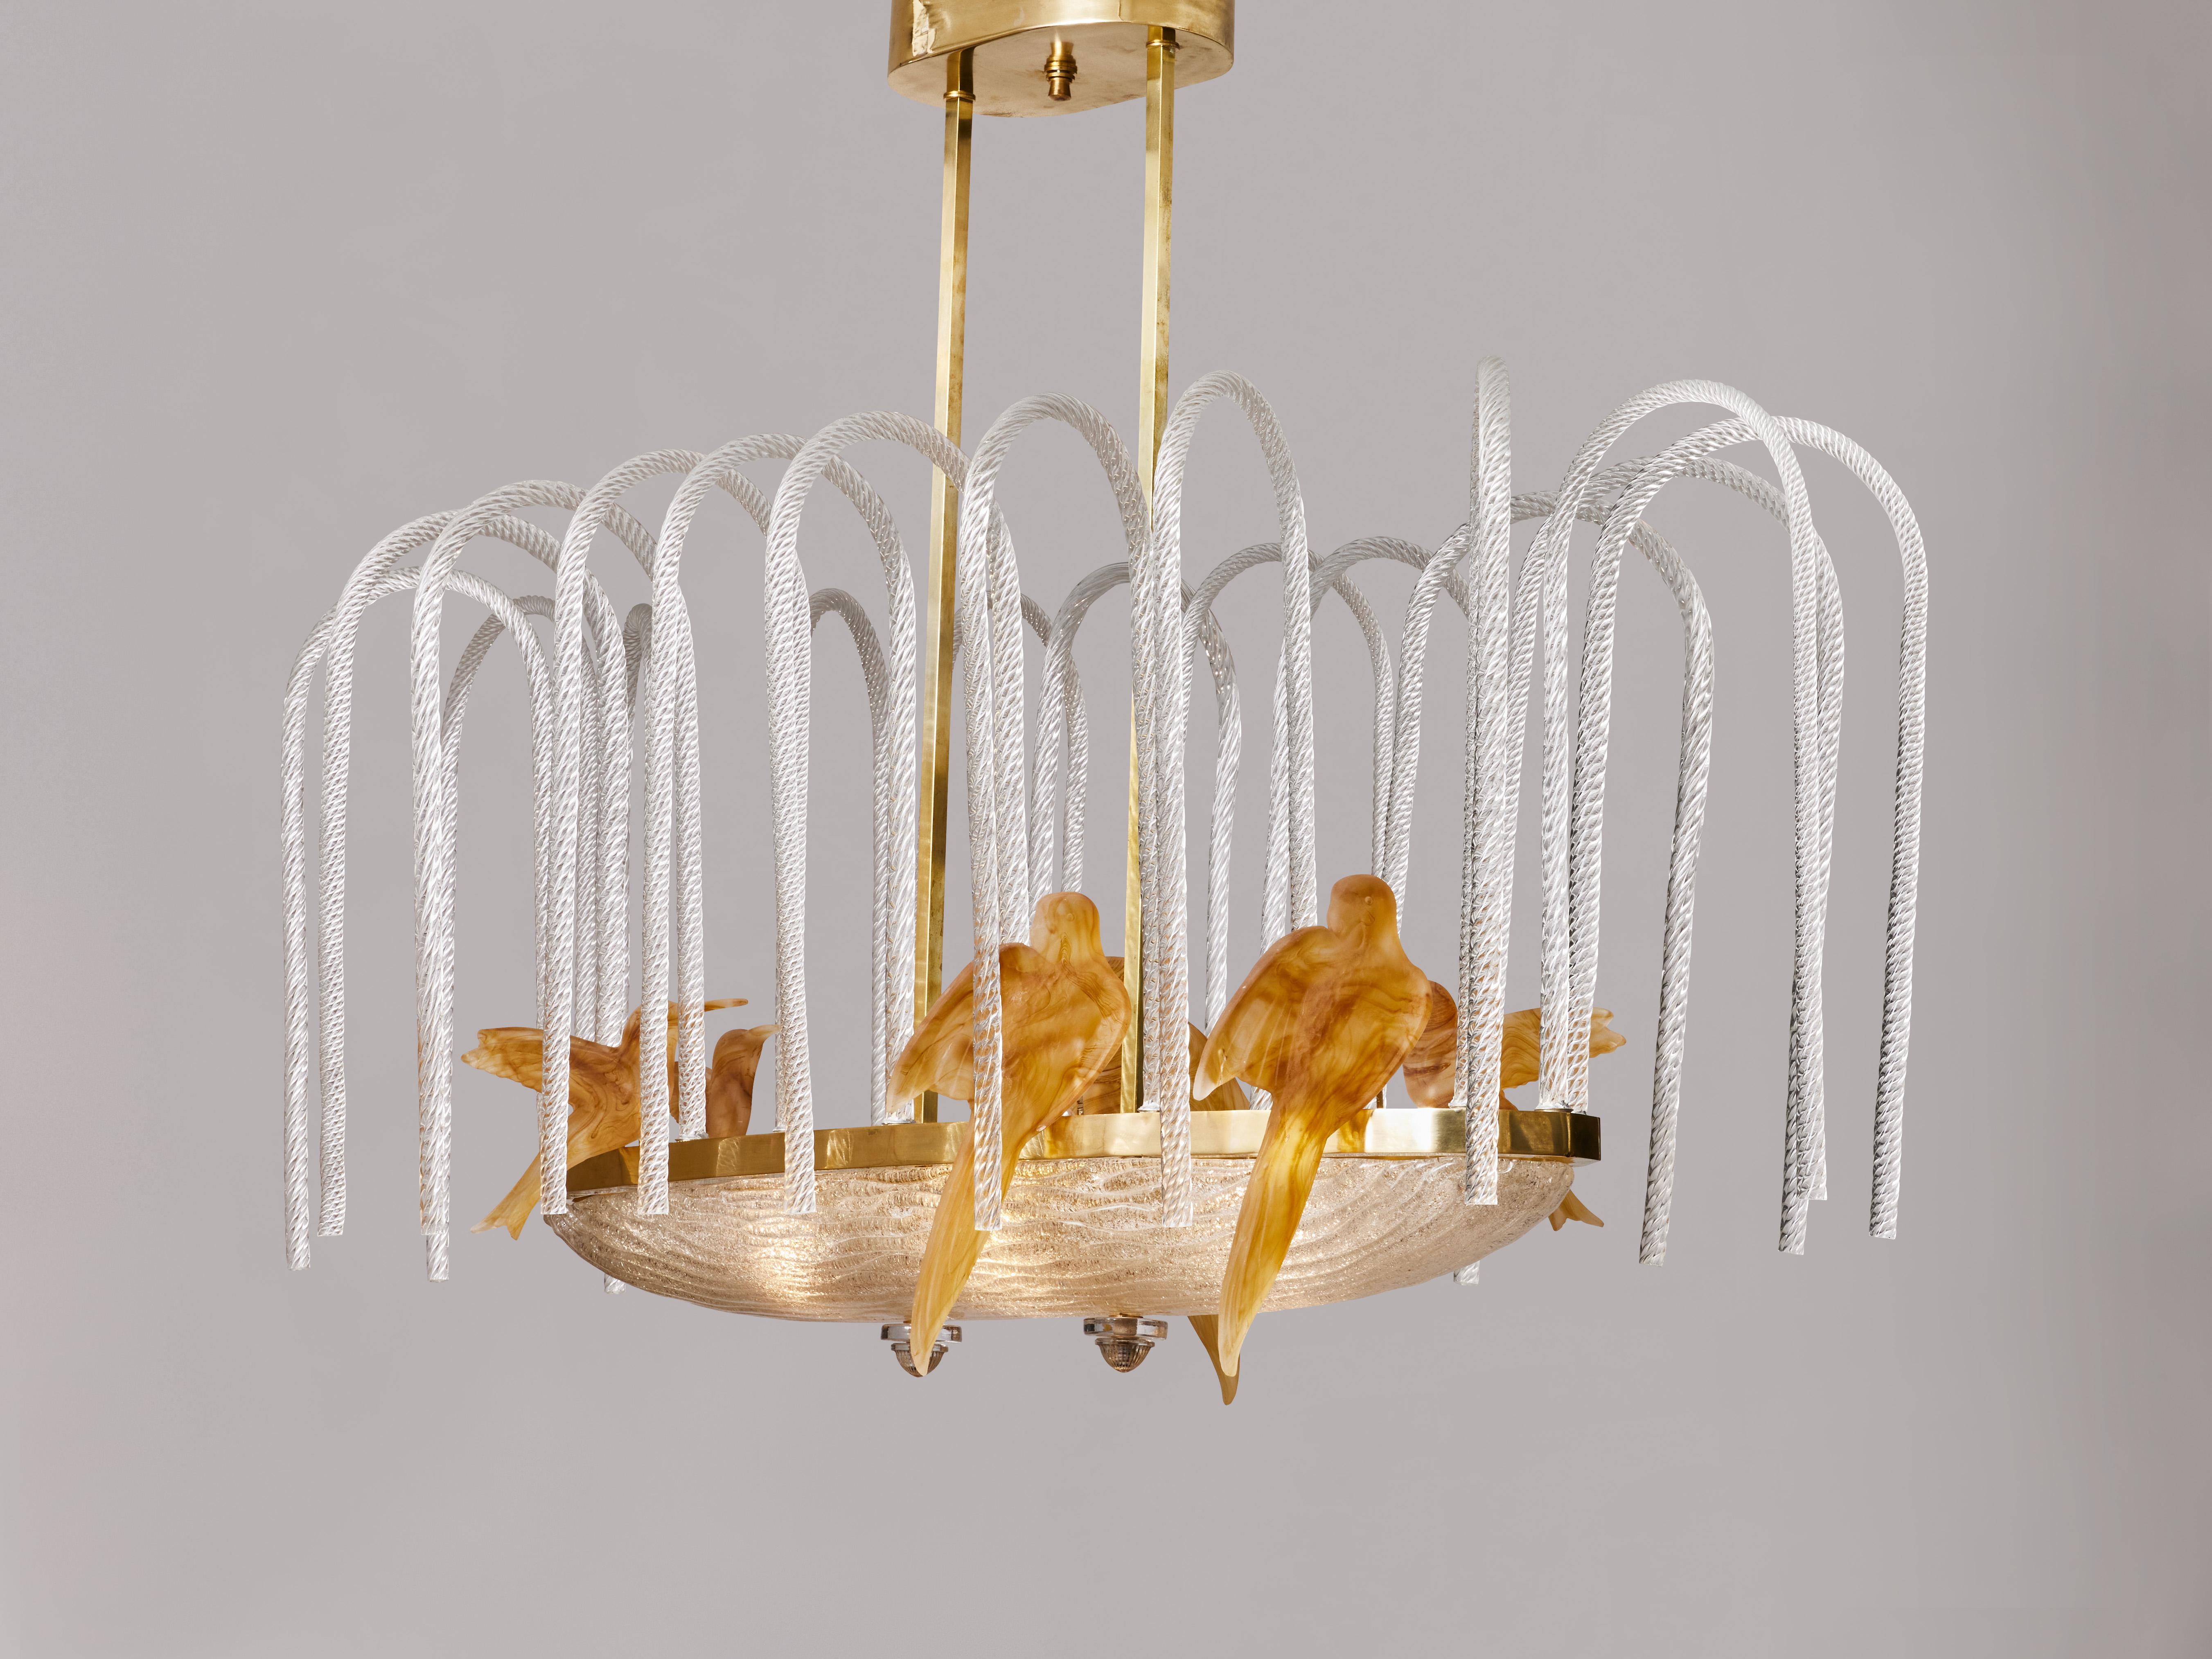 Superb chandelier with 